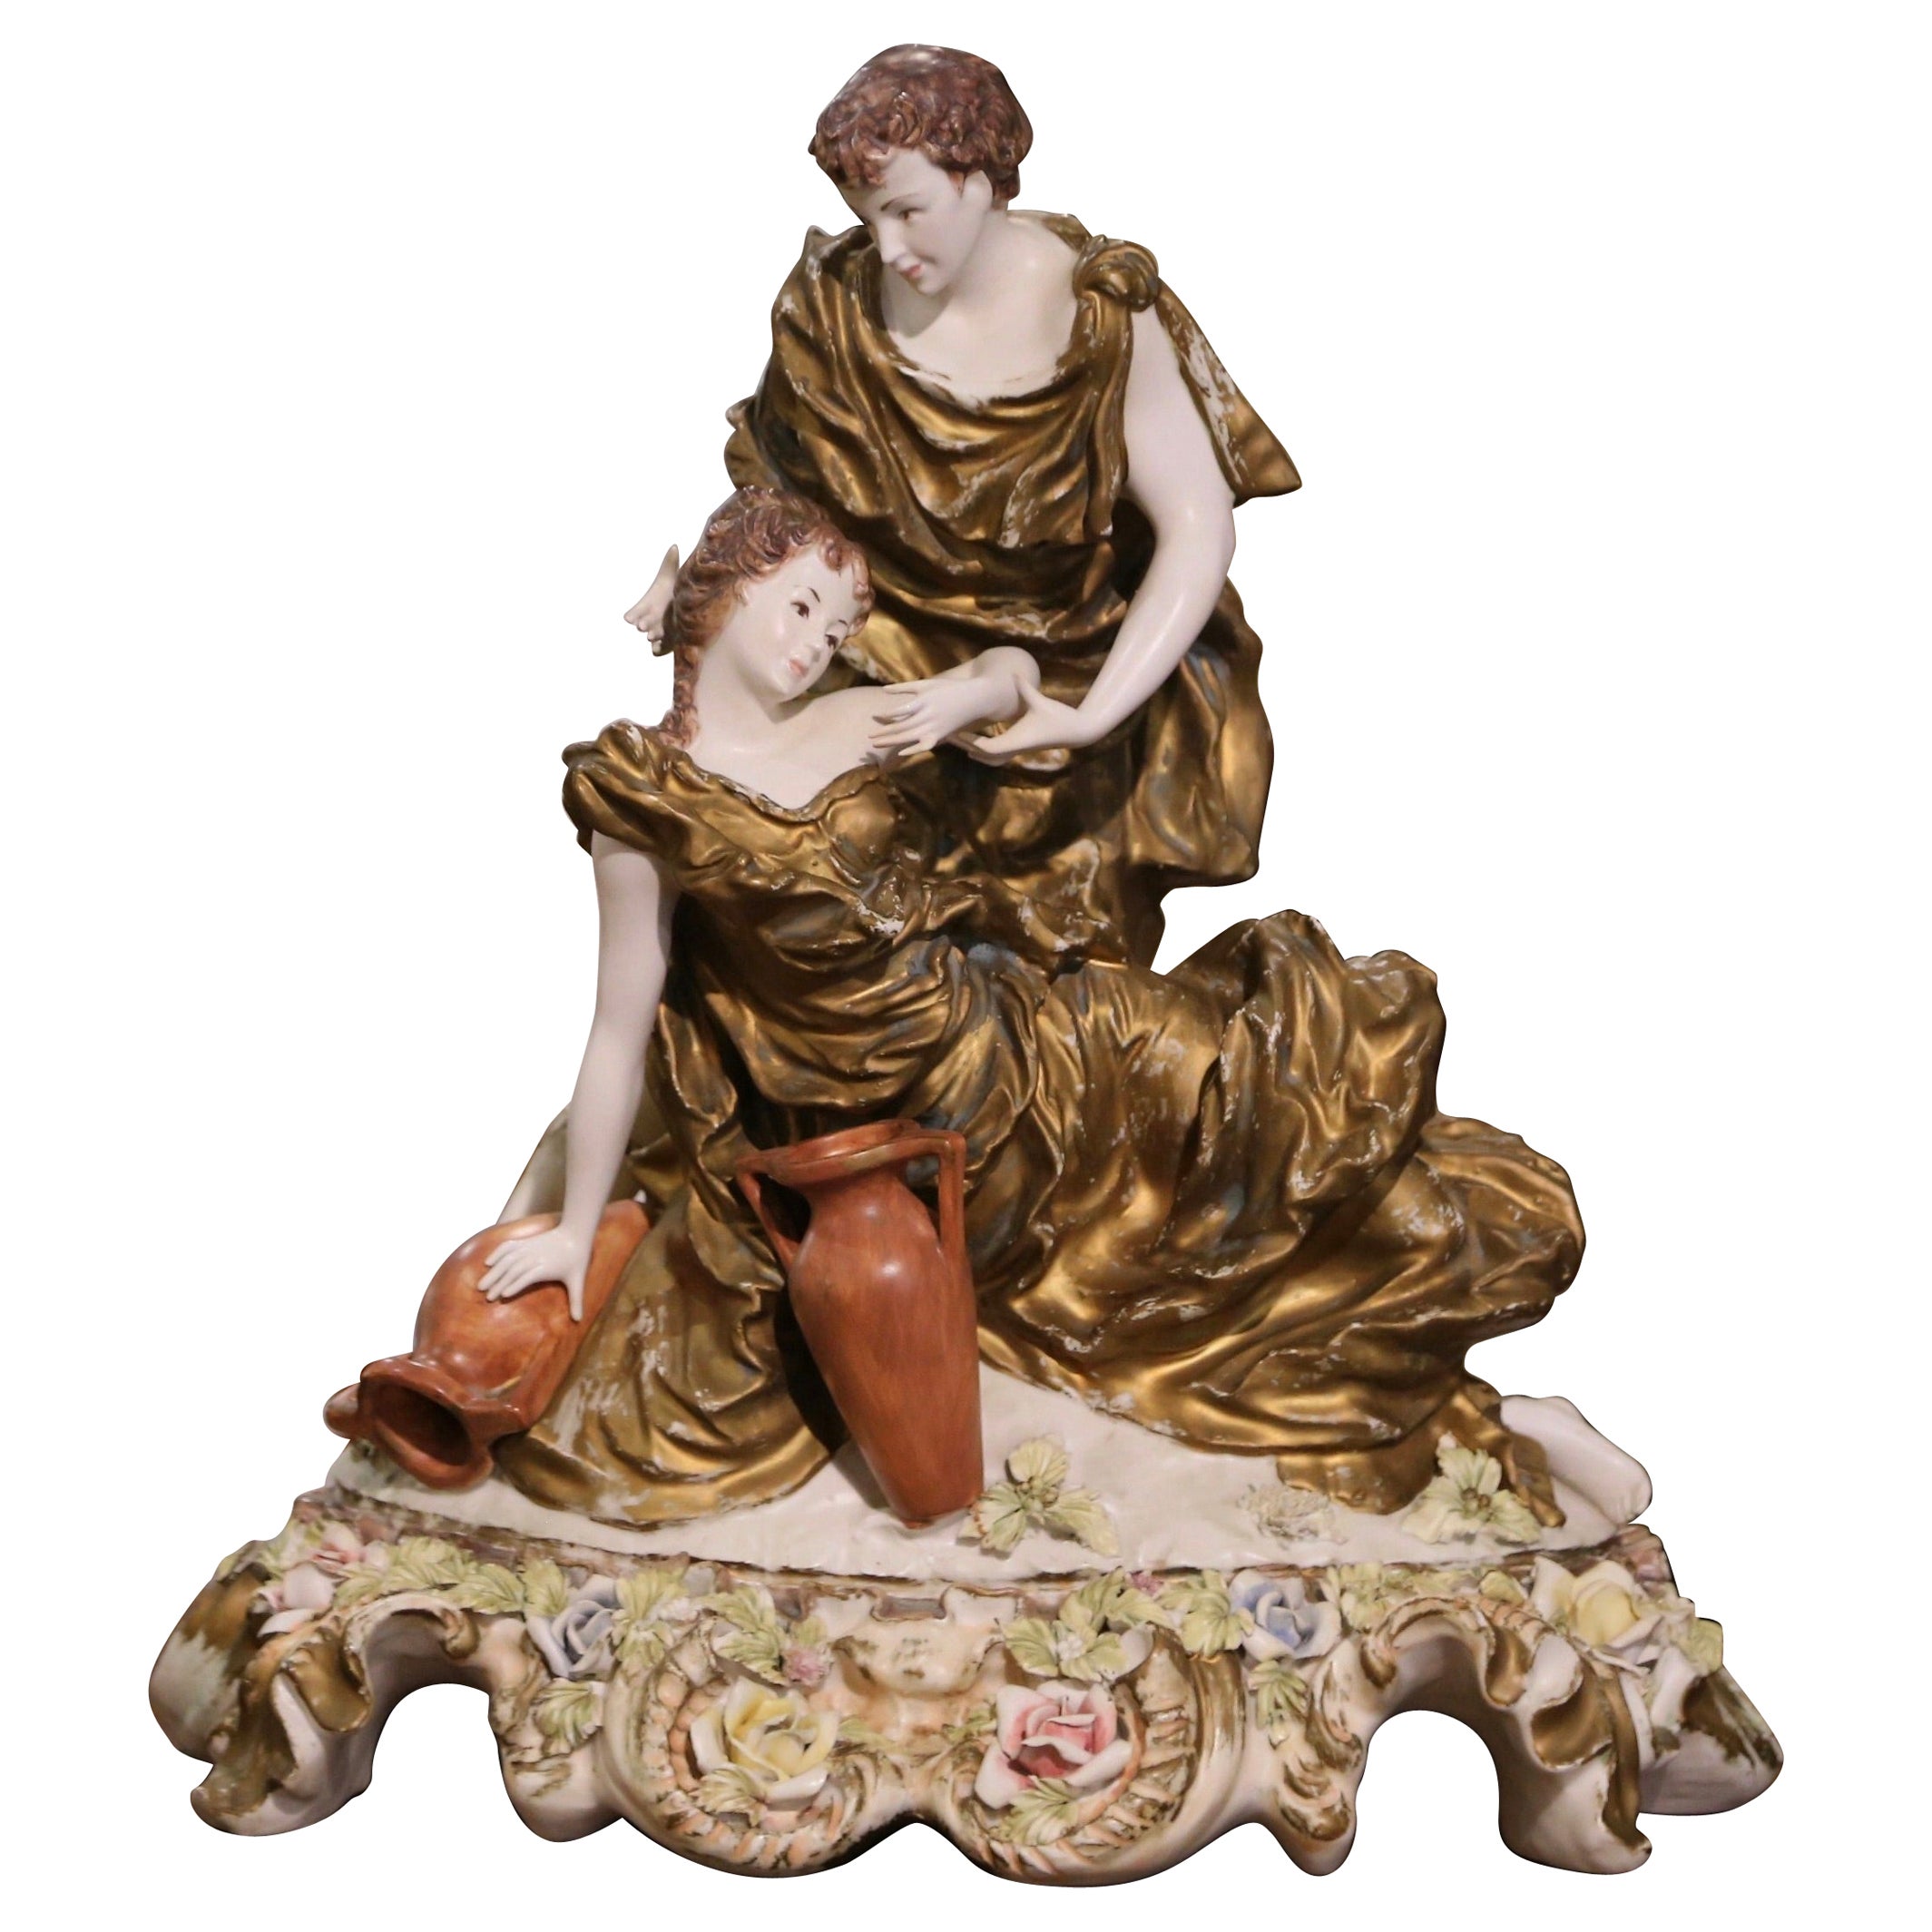 20th Century Italian Hand-Painted and Gilt Porcelain Capodimonte Figurine Statue For Sale